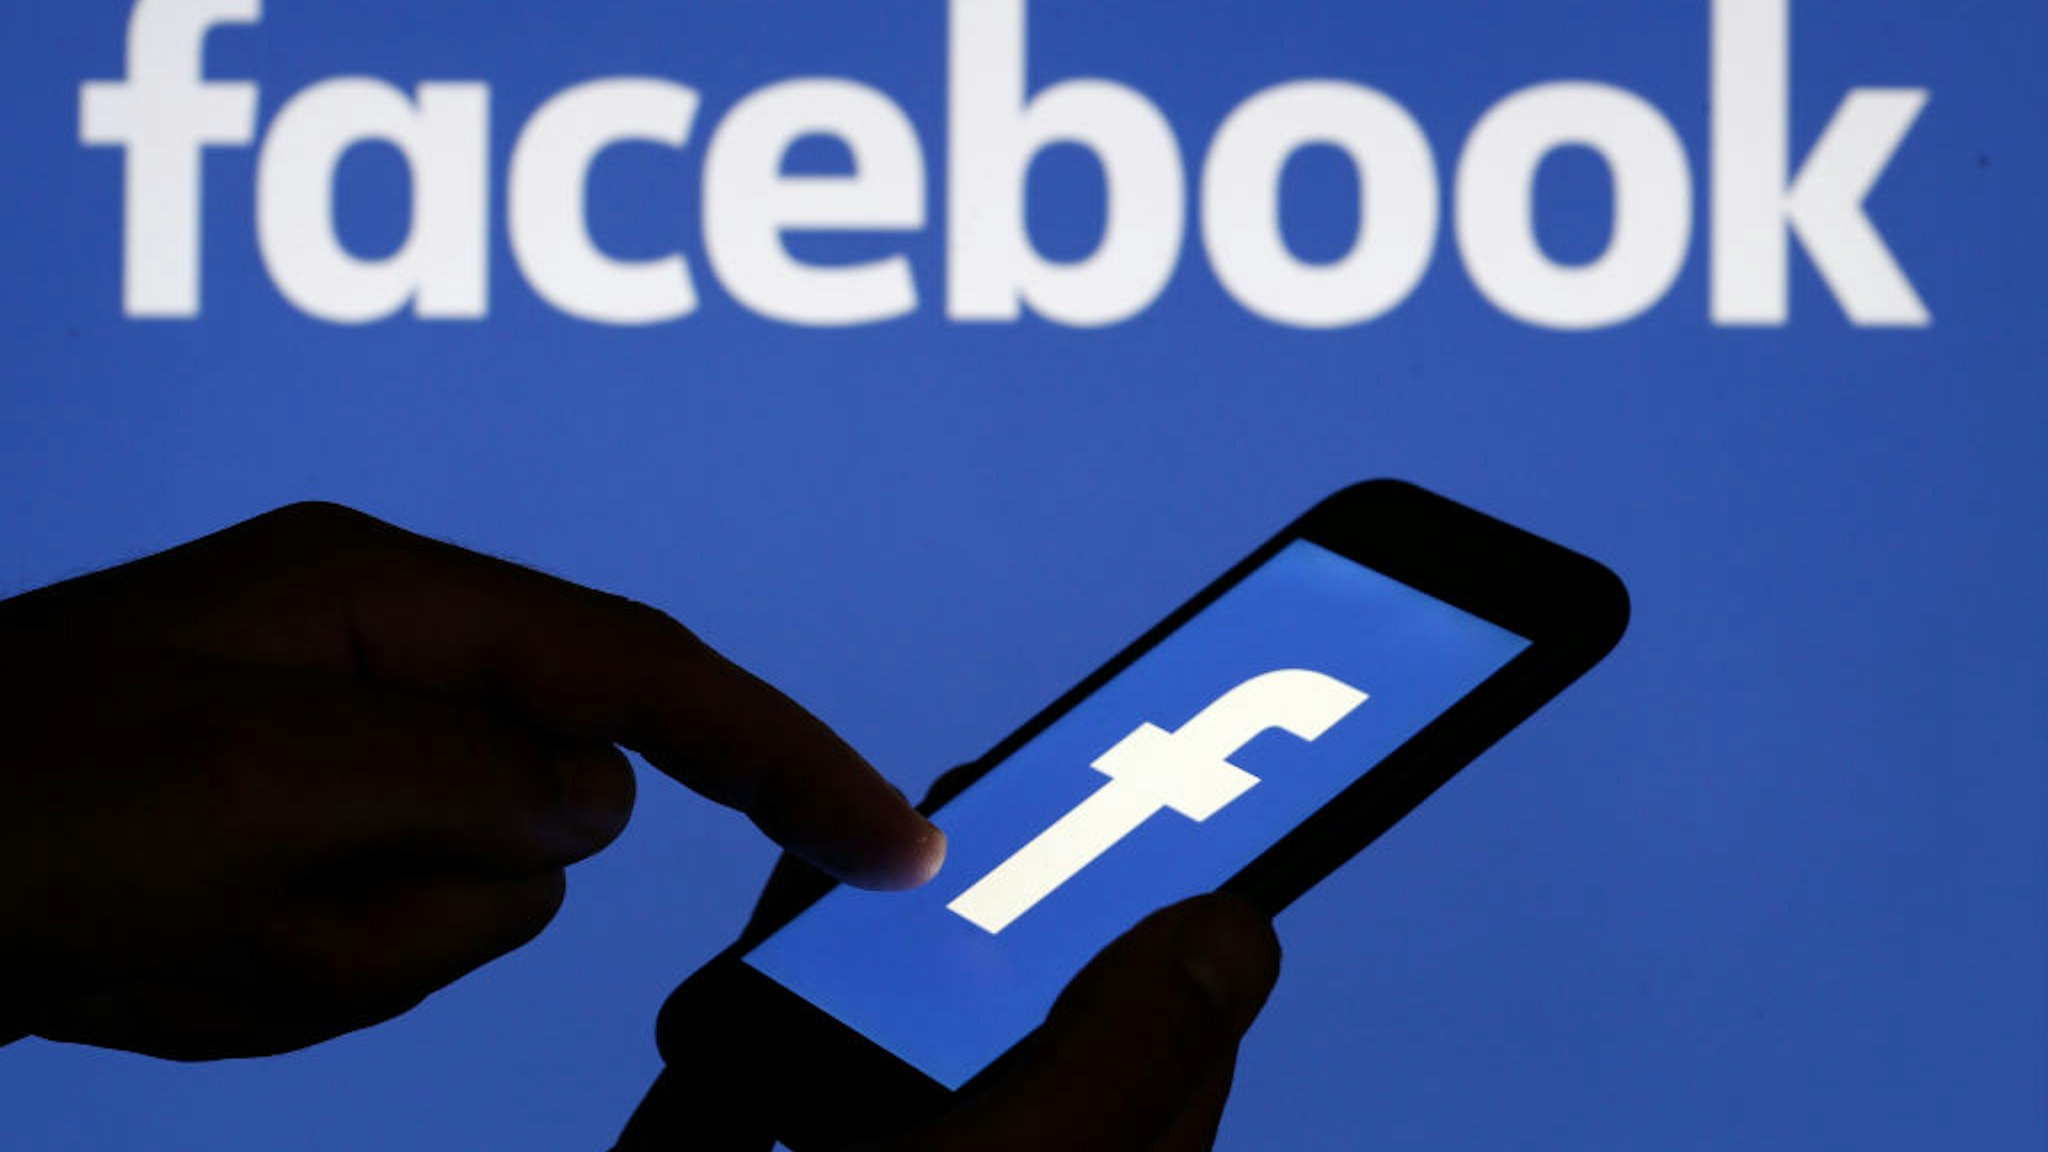 In this photo illustration, the Facebook logo is displayed on the screen of a smartphone in front of a computer screen displaying the logo of Facebook on September 09, 2019 in Paris, France.